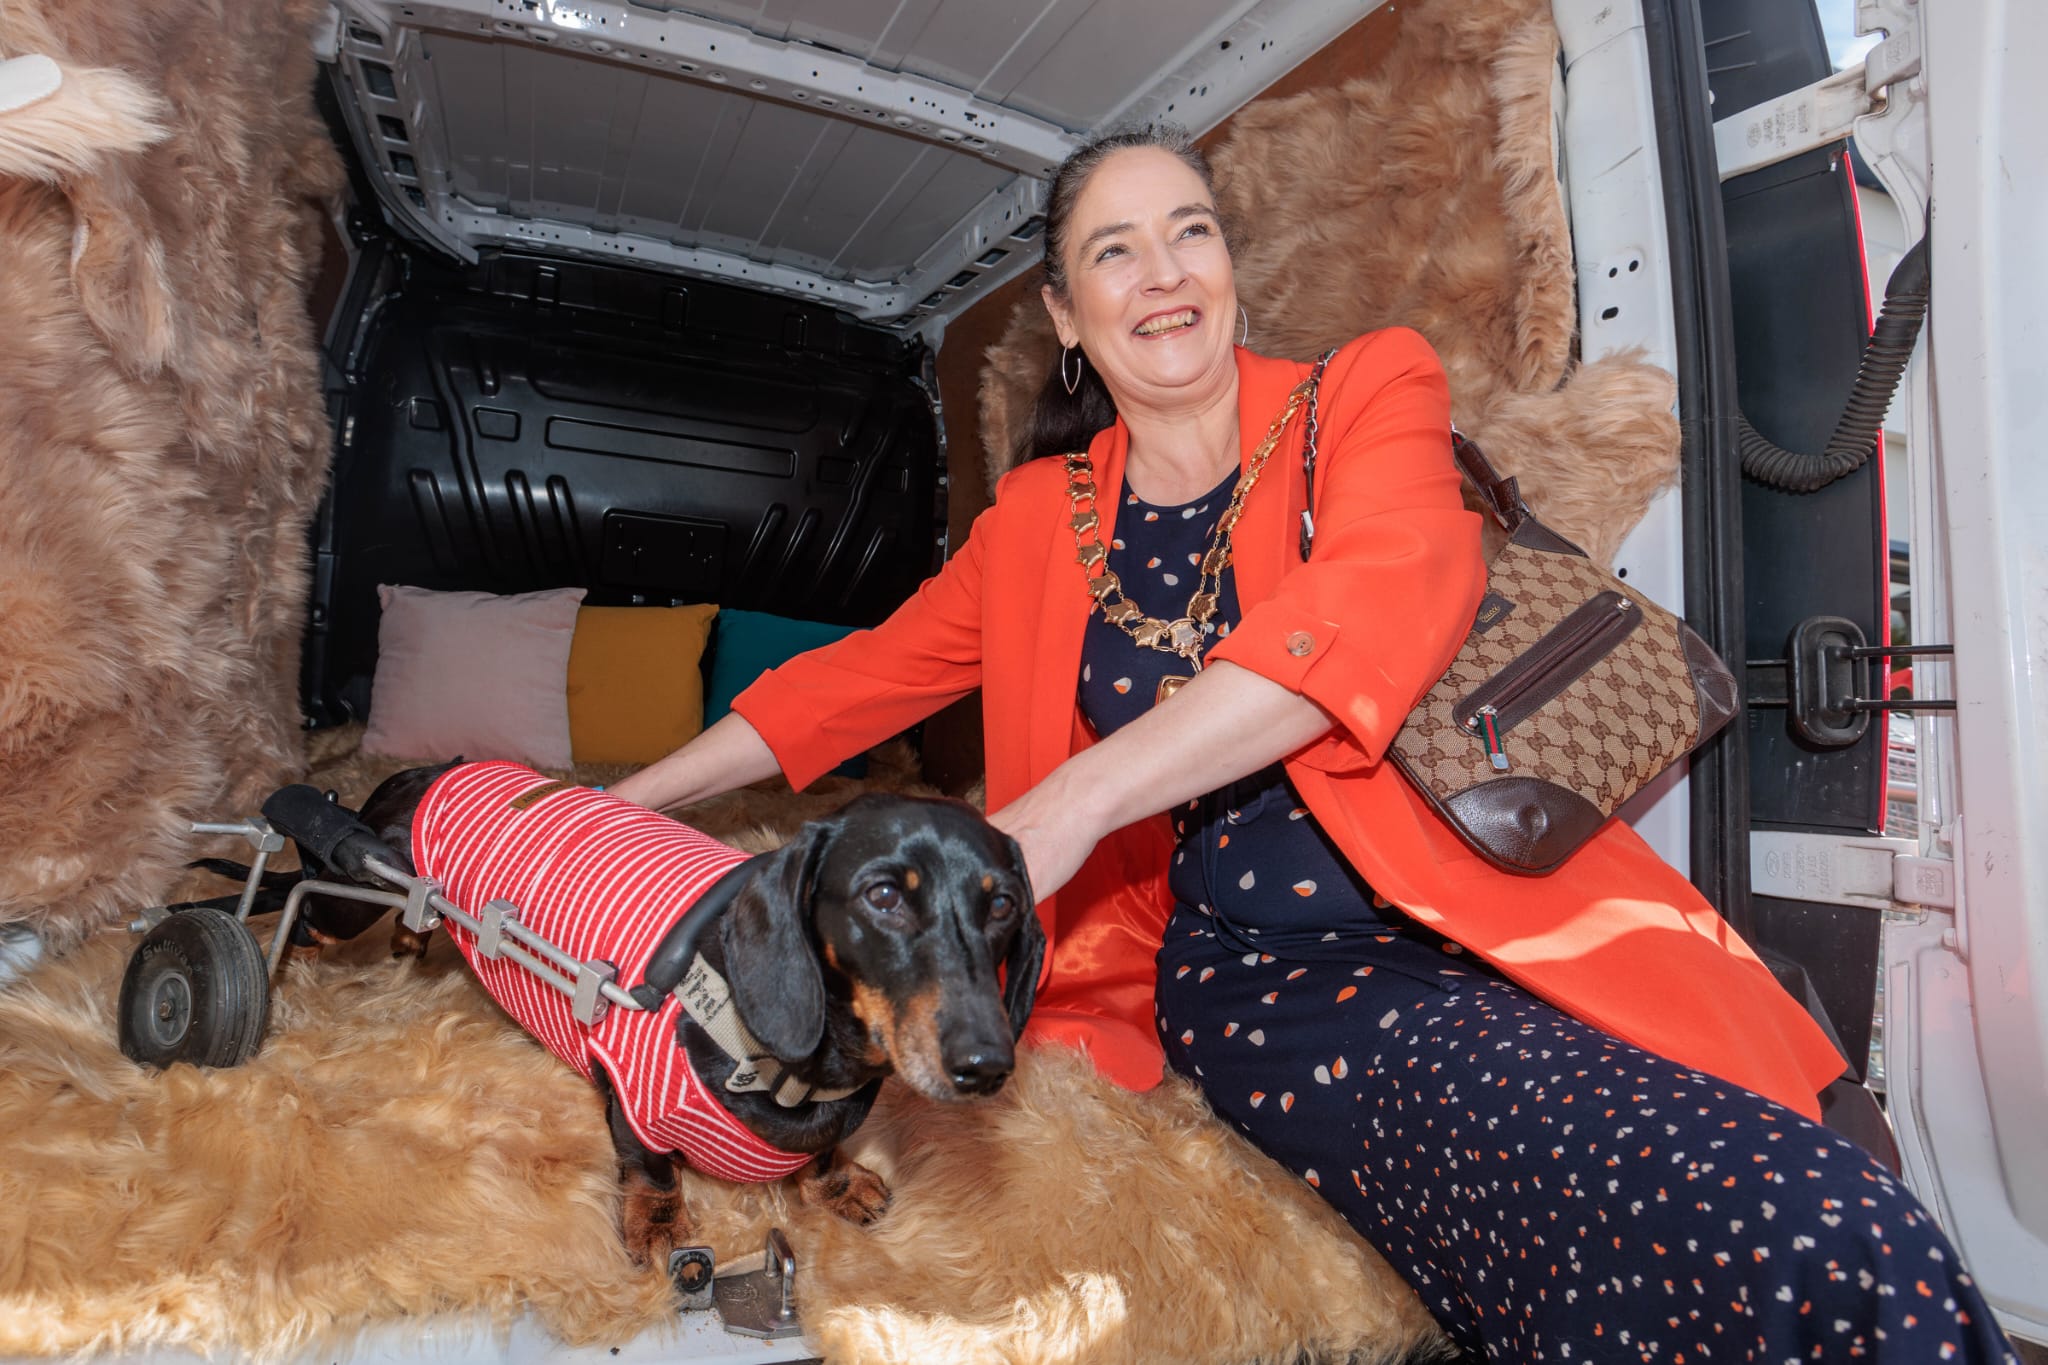 The new Jollyes pet store has opened at Kew Retail Park in Southport. Mayor of Sefton Cllr Clare Carragher with Dennis the Dachsund in the Jollyes stroke van